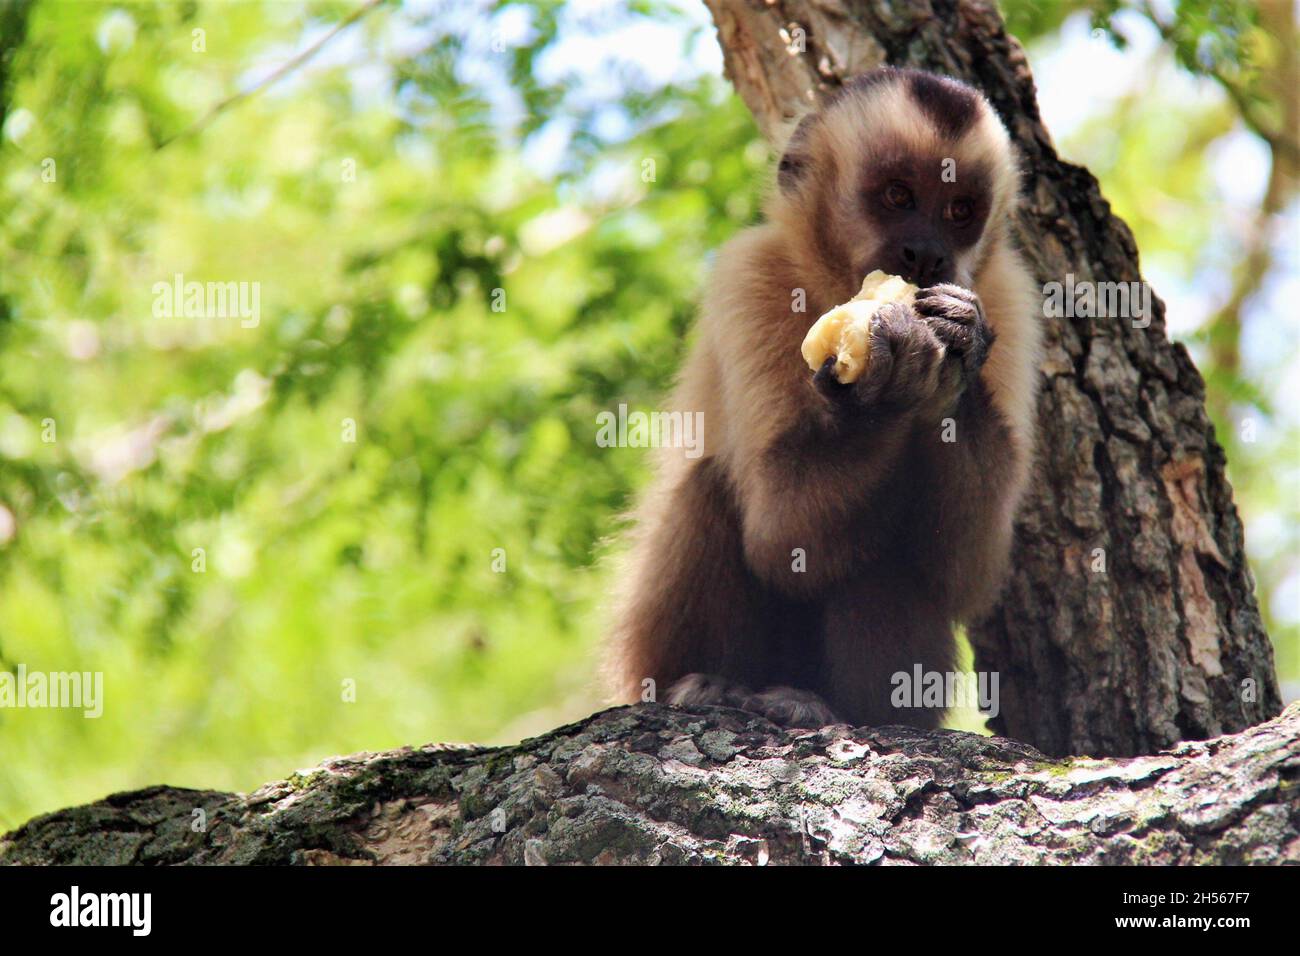 Monkey, on top of a tree trunk, eating a banana with both hands. Bonito - Mato Grosso do Sul - Brazil. Stock Photo